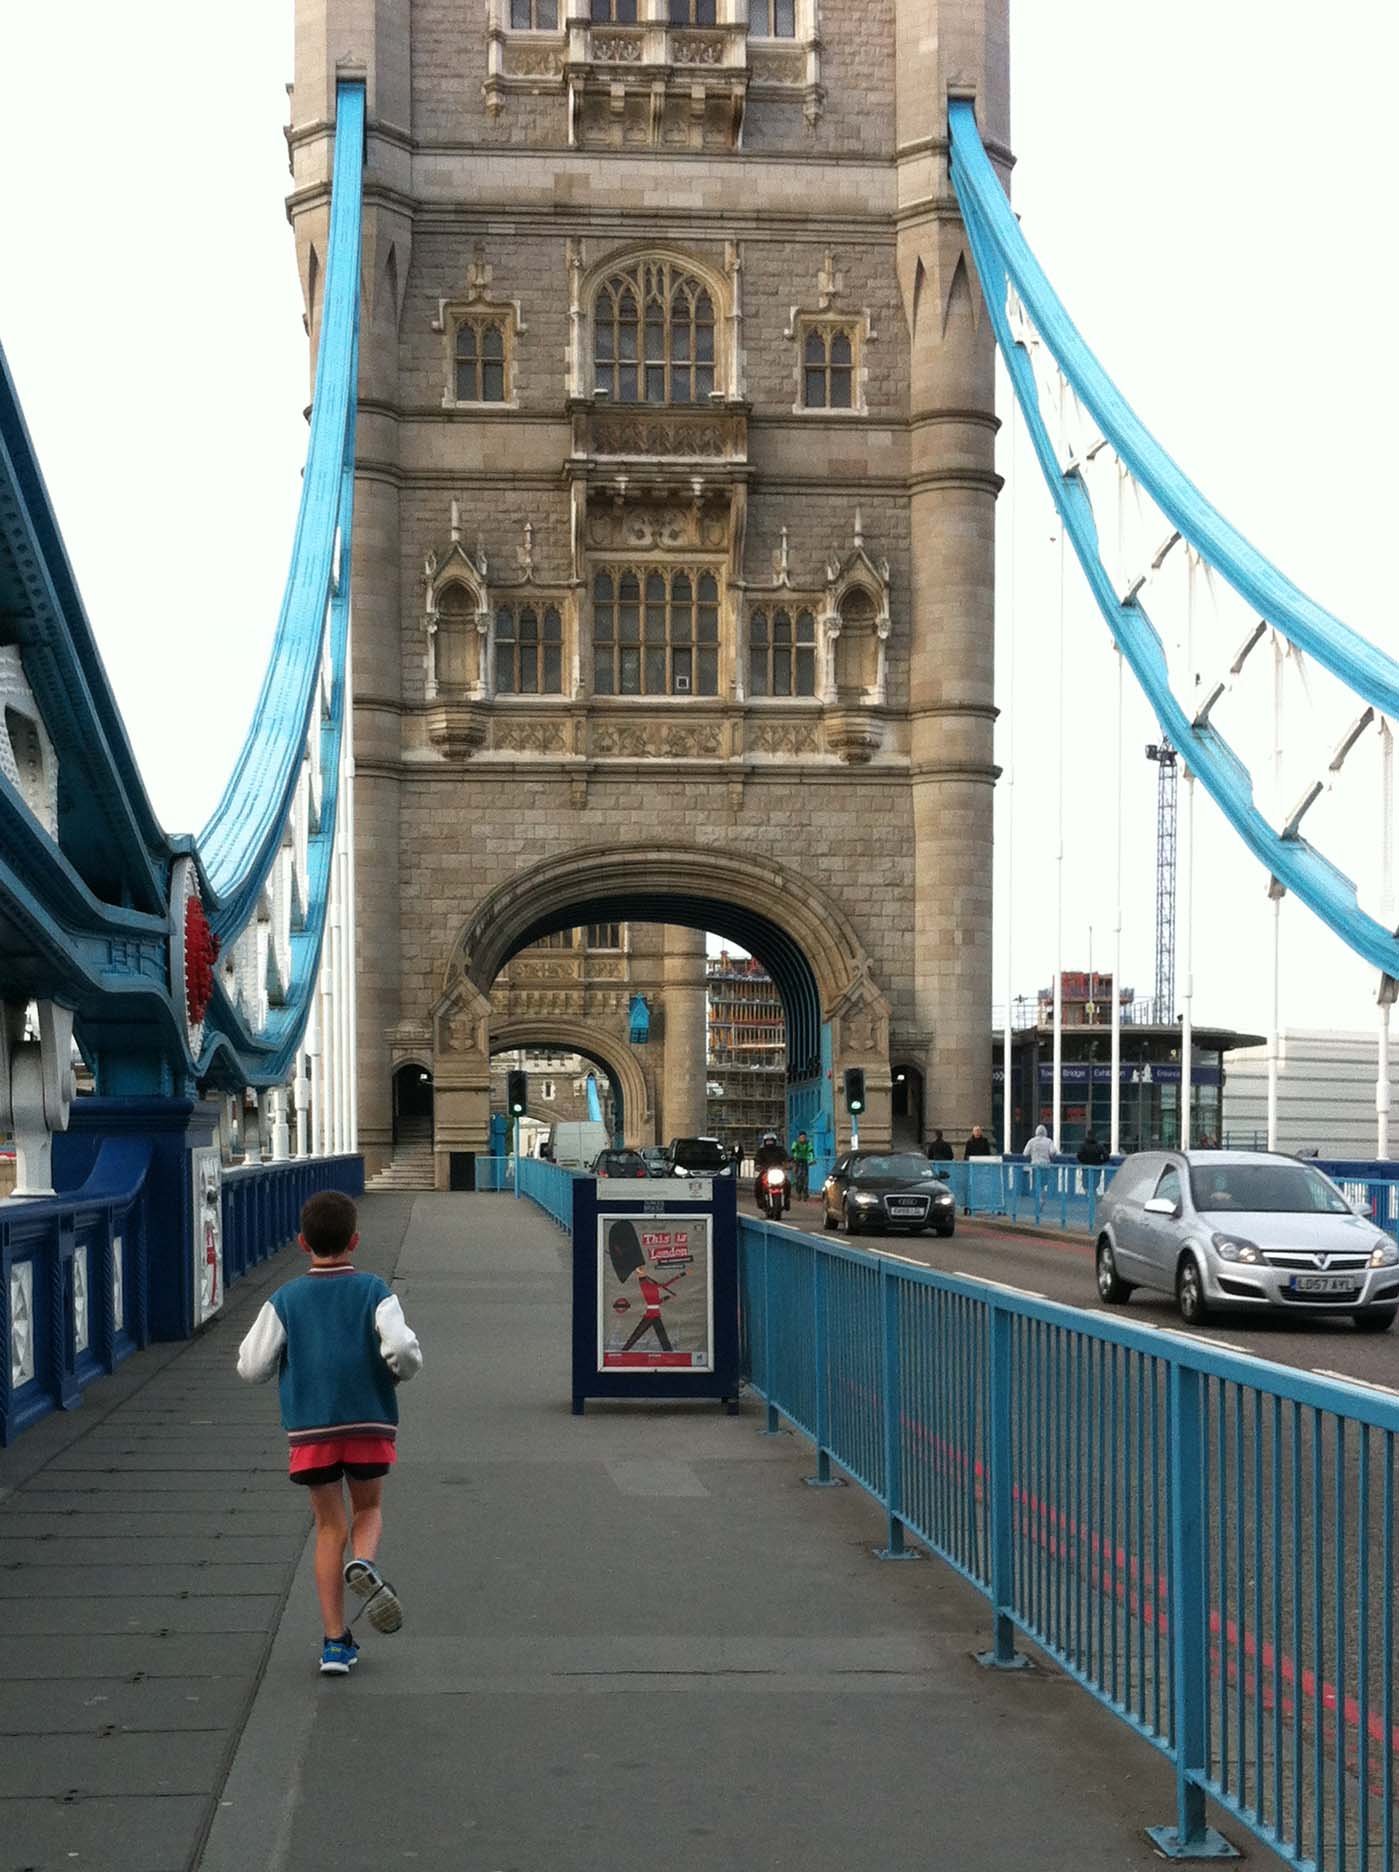 Running with Jay over Tower Bridge